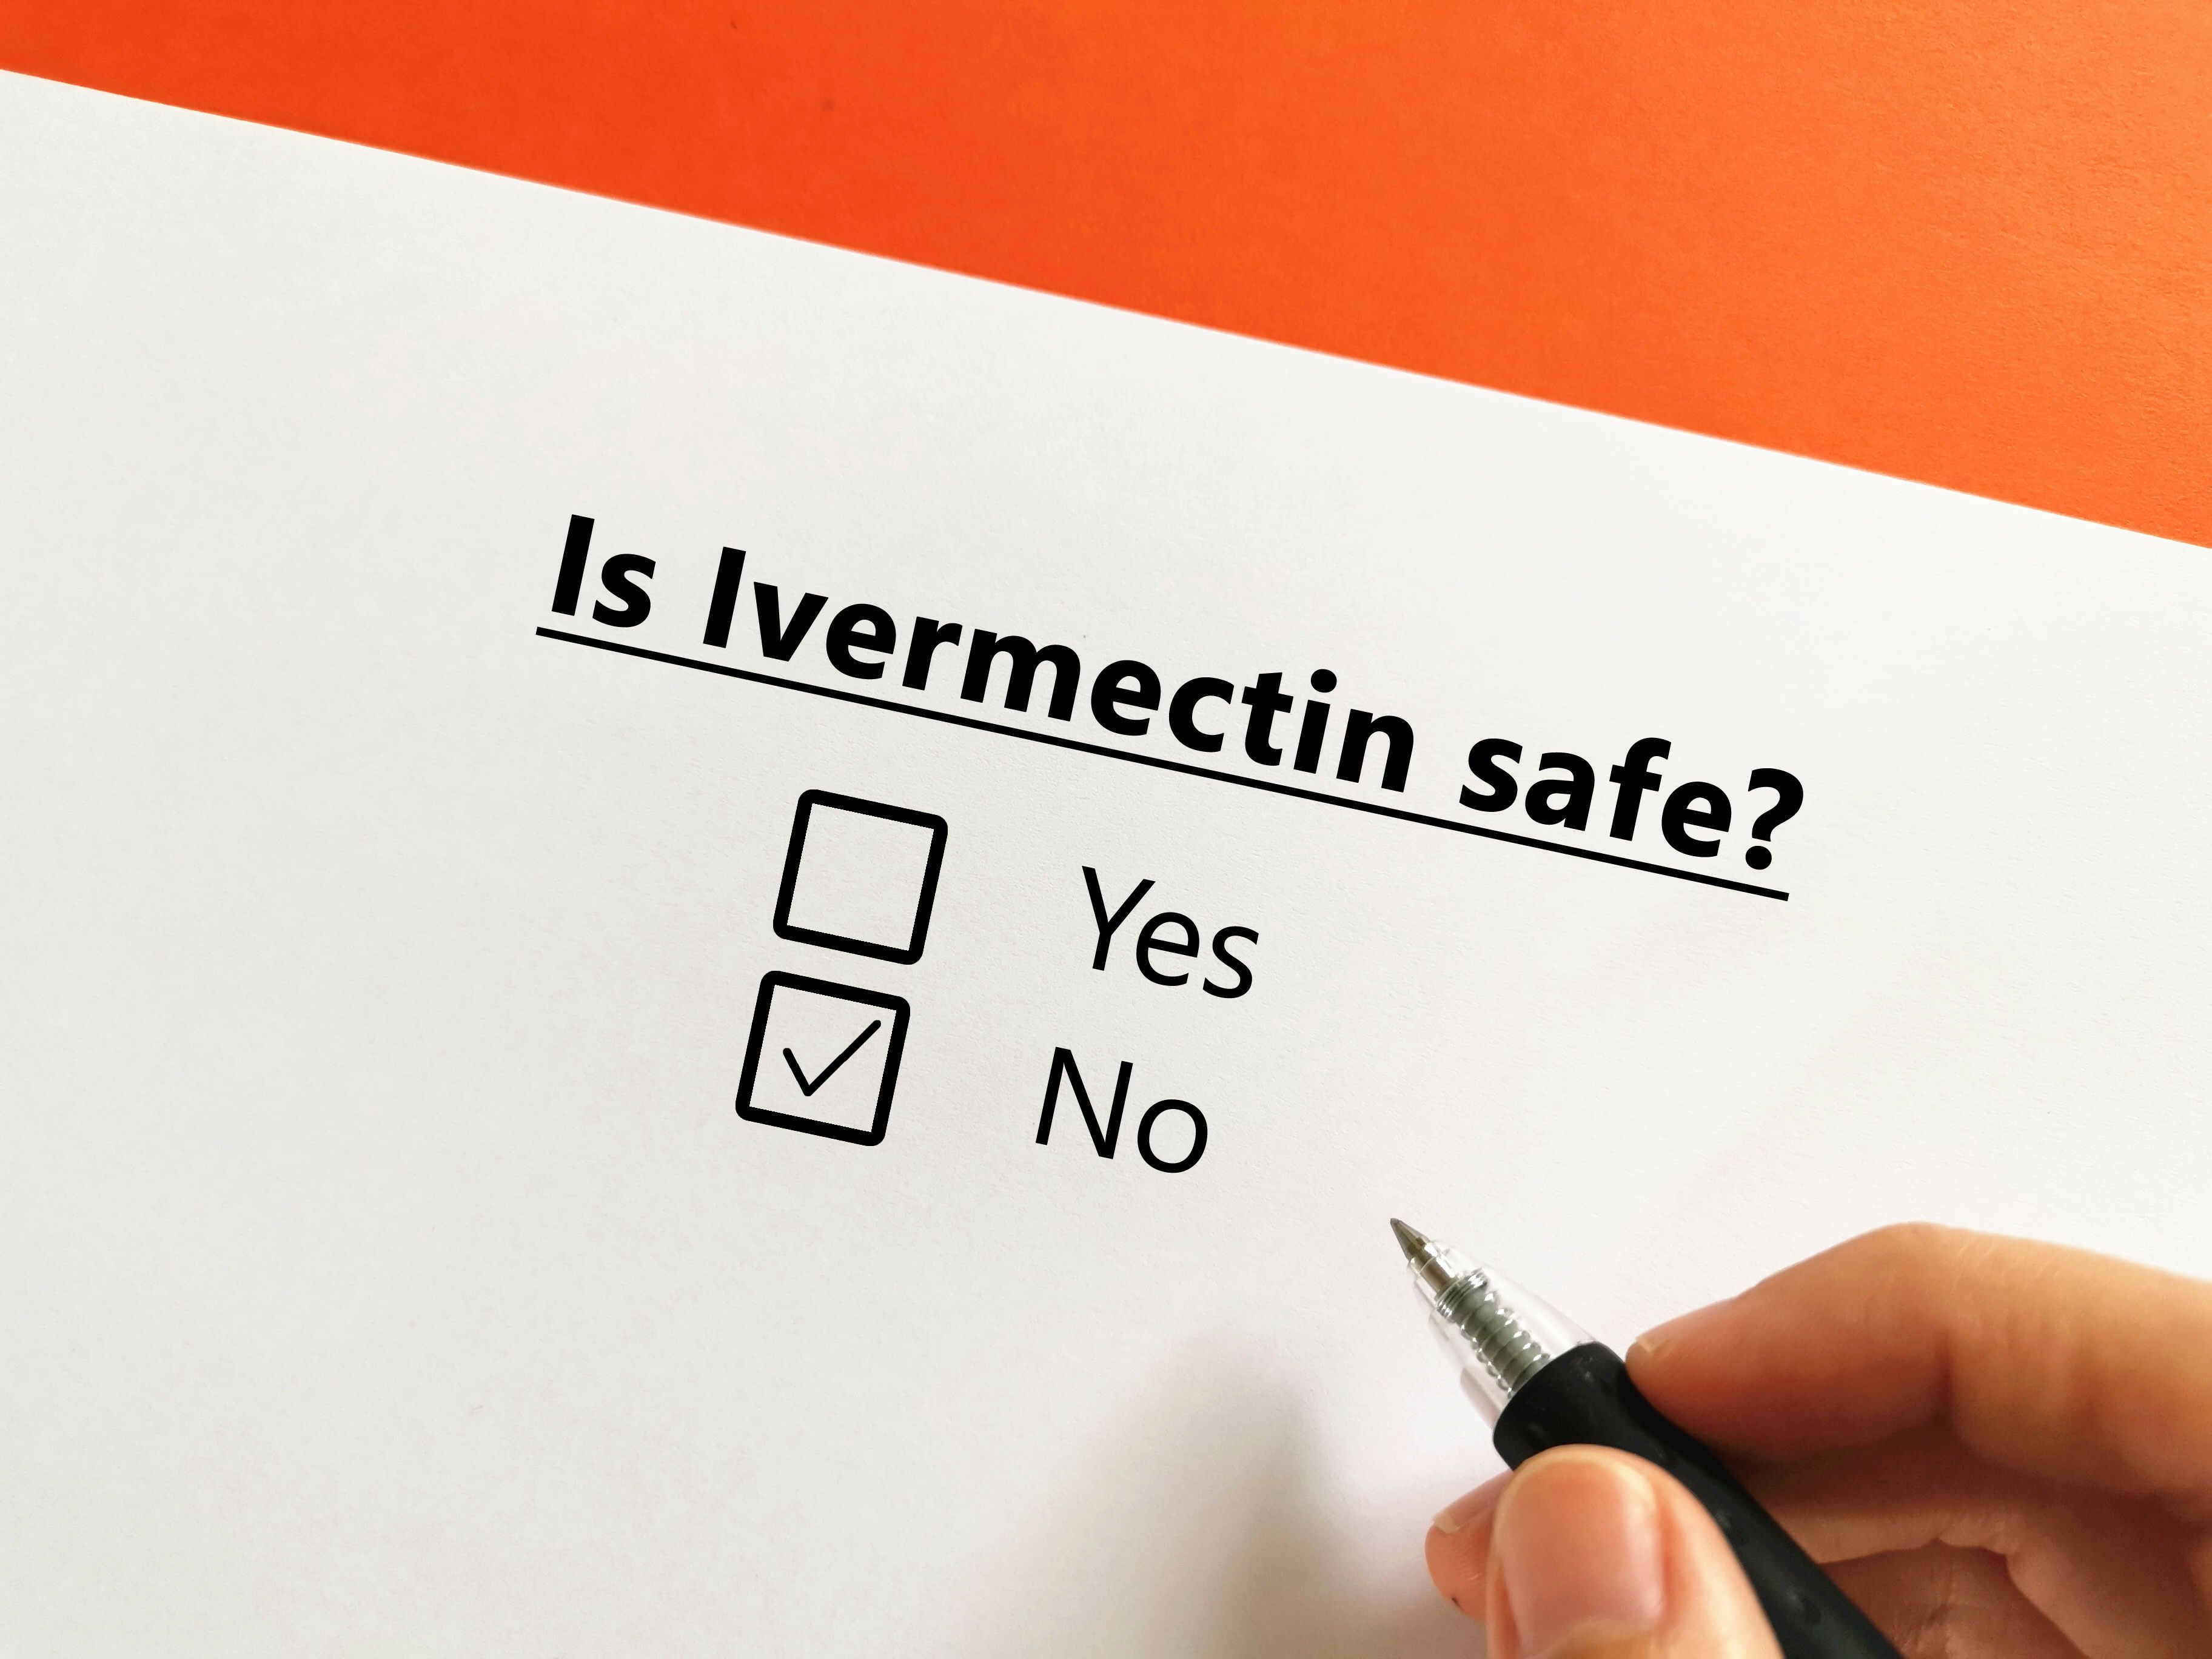 The Infectious Diseases Society of America (IDSA), HIV Medicine Association (HIVMA), and Society for Healthcare Epidemiology in America (SHEA) released a statement opposing legal intervention on behalf of ivermectin as a COVID-19 treatment.